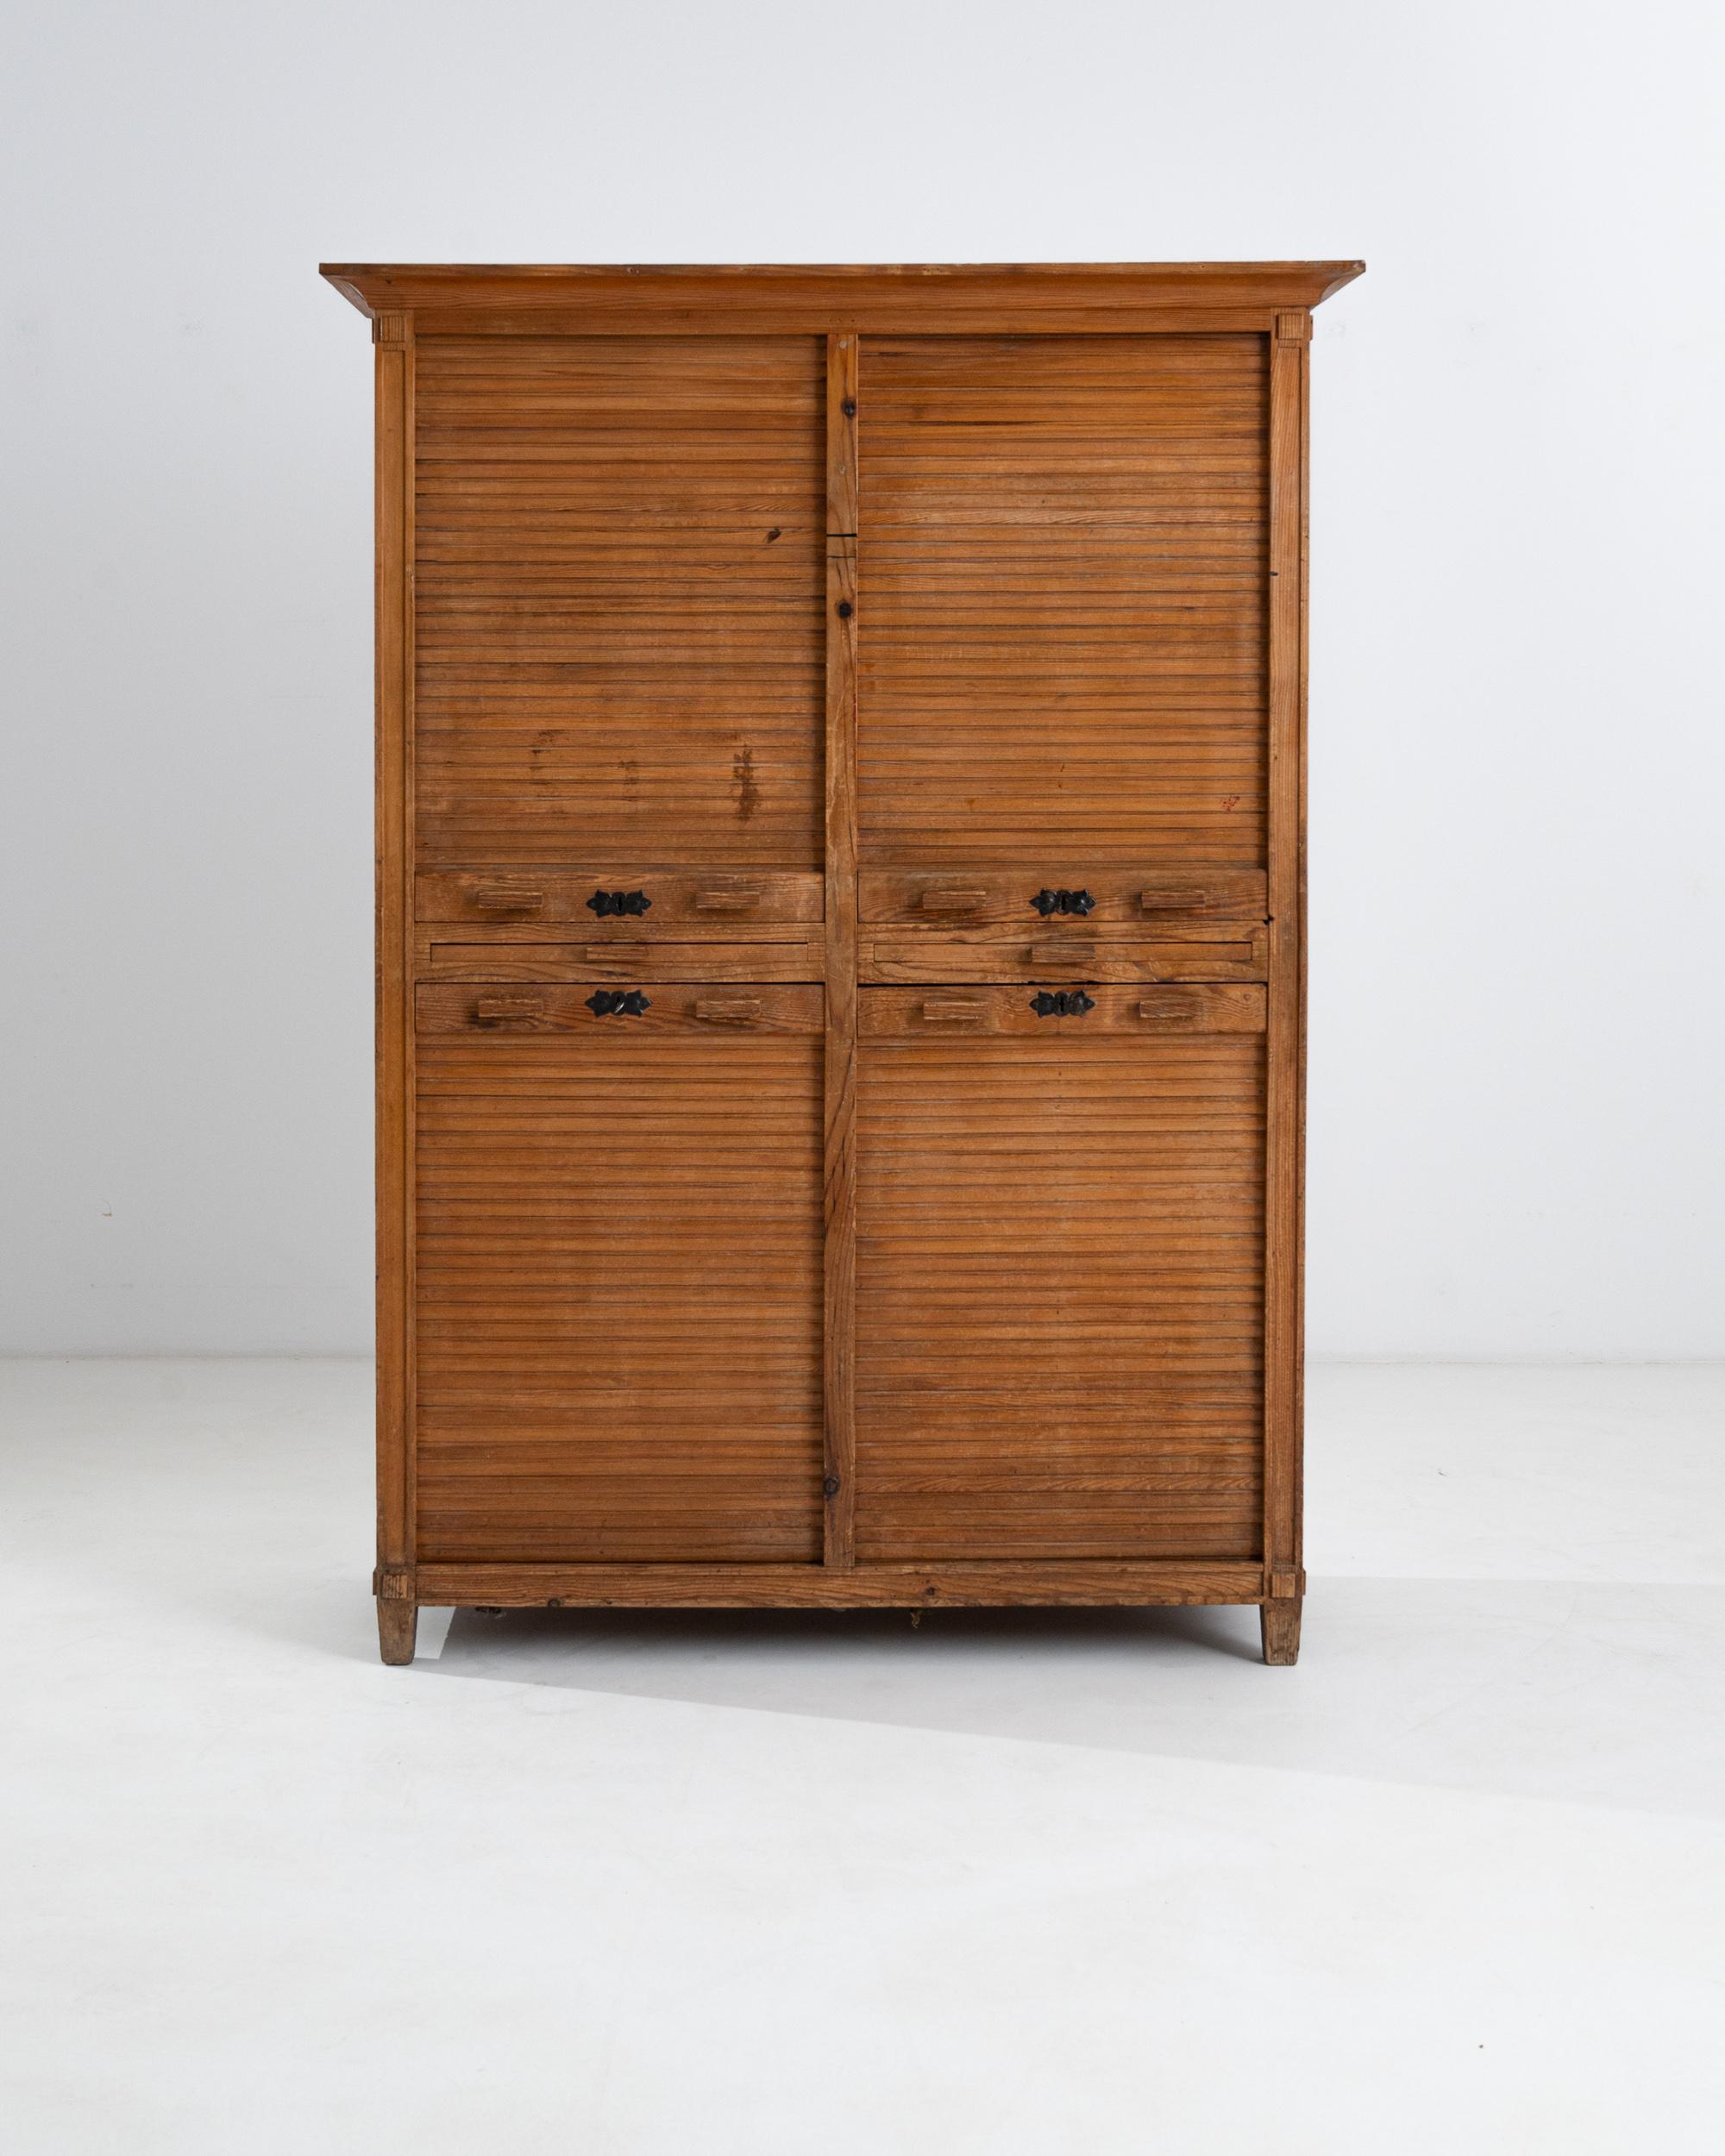 This beautiful 1920s cabinet epitomizes the elegance and innovation of Central European carpentry. Sourced from Czechia, vertical roller blinds serve as cupboard doors, retracting gracefully into the cabinet to reveal a geometric arrangement of